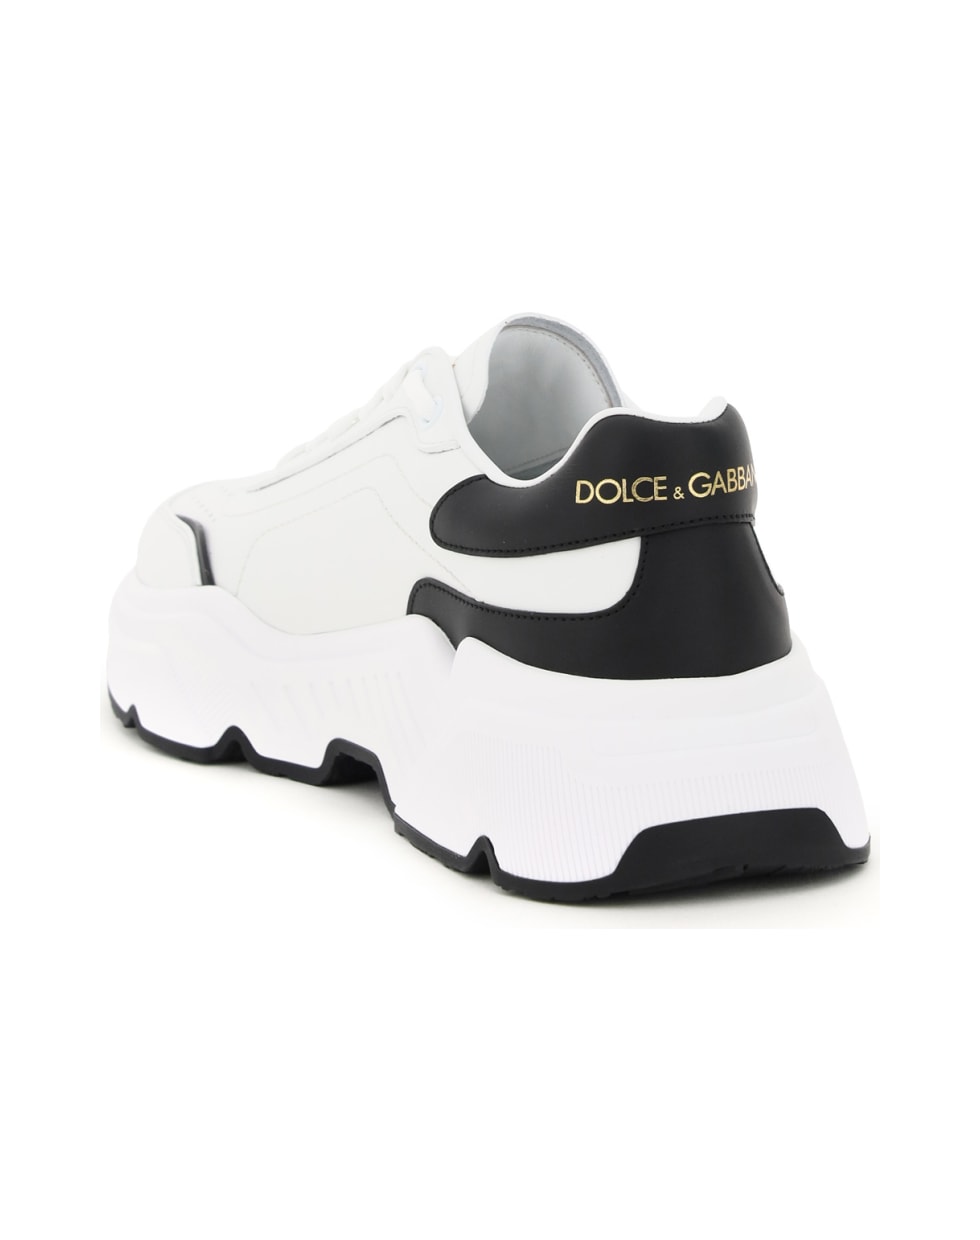 Dolce & Gabbana Daymaster Leather Sneakers - Bianco